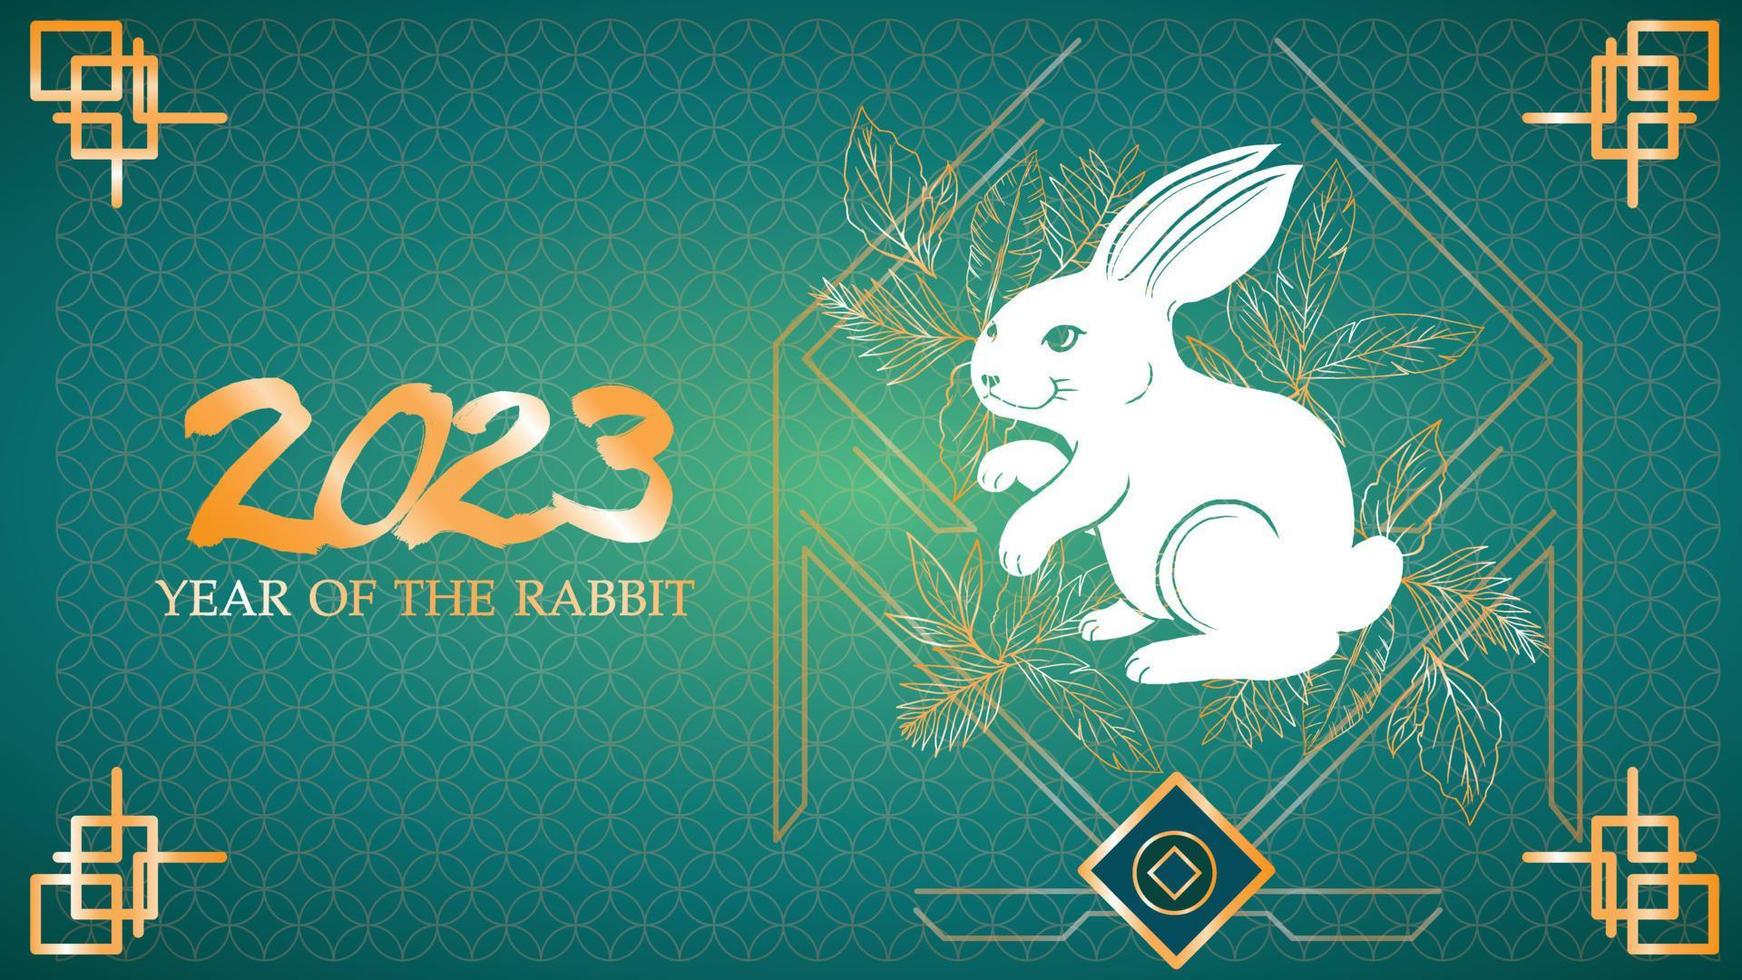 Year of the Rabbit 2023 Chinese New Year Chinese zodiac concept white rabbit with paper cut pattern and gold leaf vector